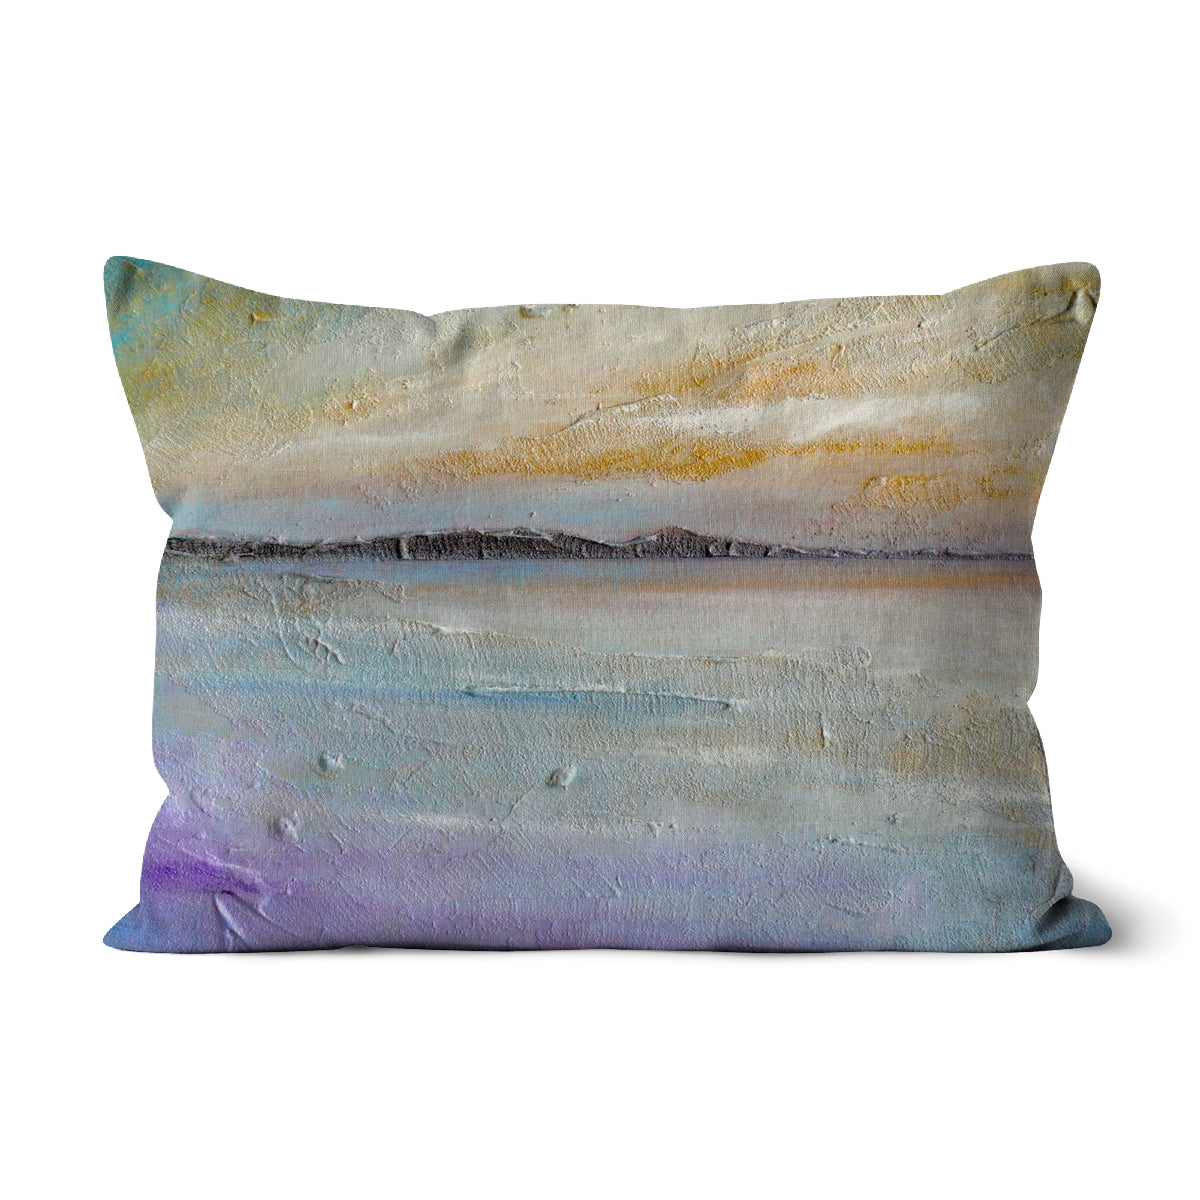 Sollas Beach South Uist Art Gifts Cushion-Cushions-Hebridean Islands Art Gallery-Canvas-19"x13"-Paintings, Prints, Homeware, Art Gifts From Scotland By Scottish Artist Kevin Hunter